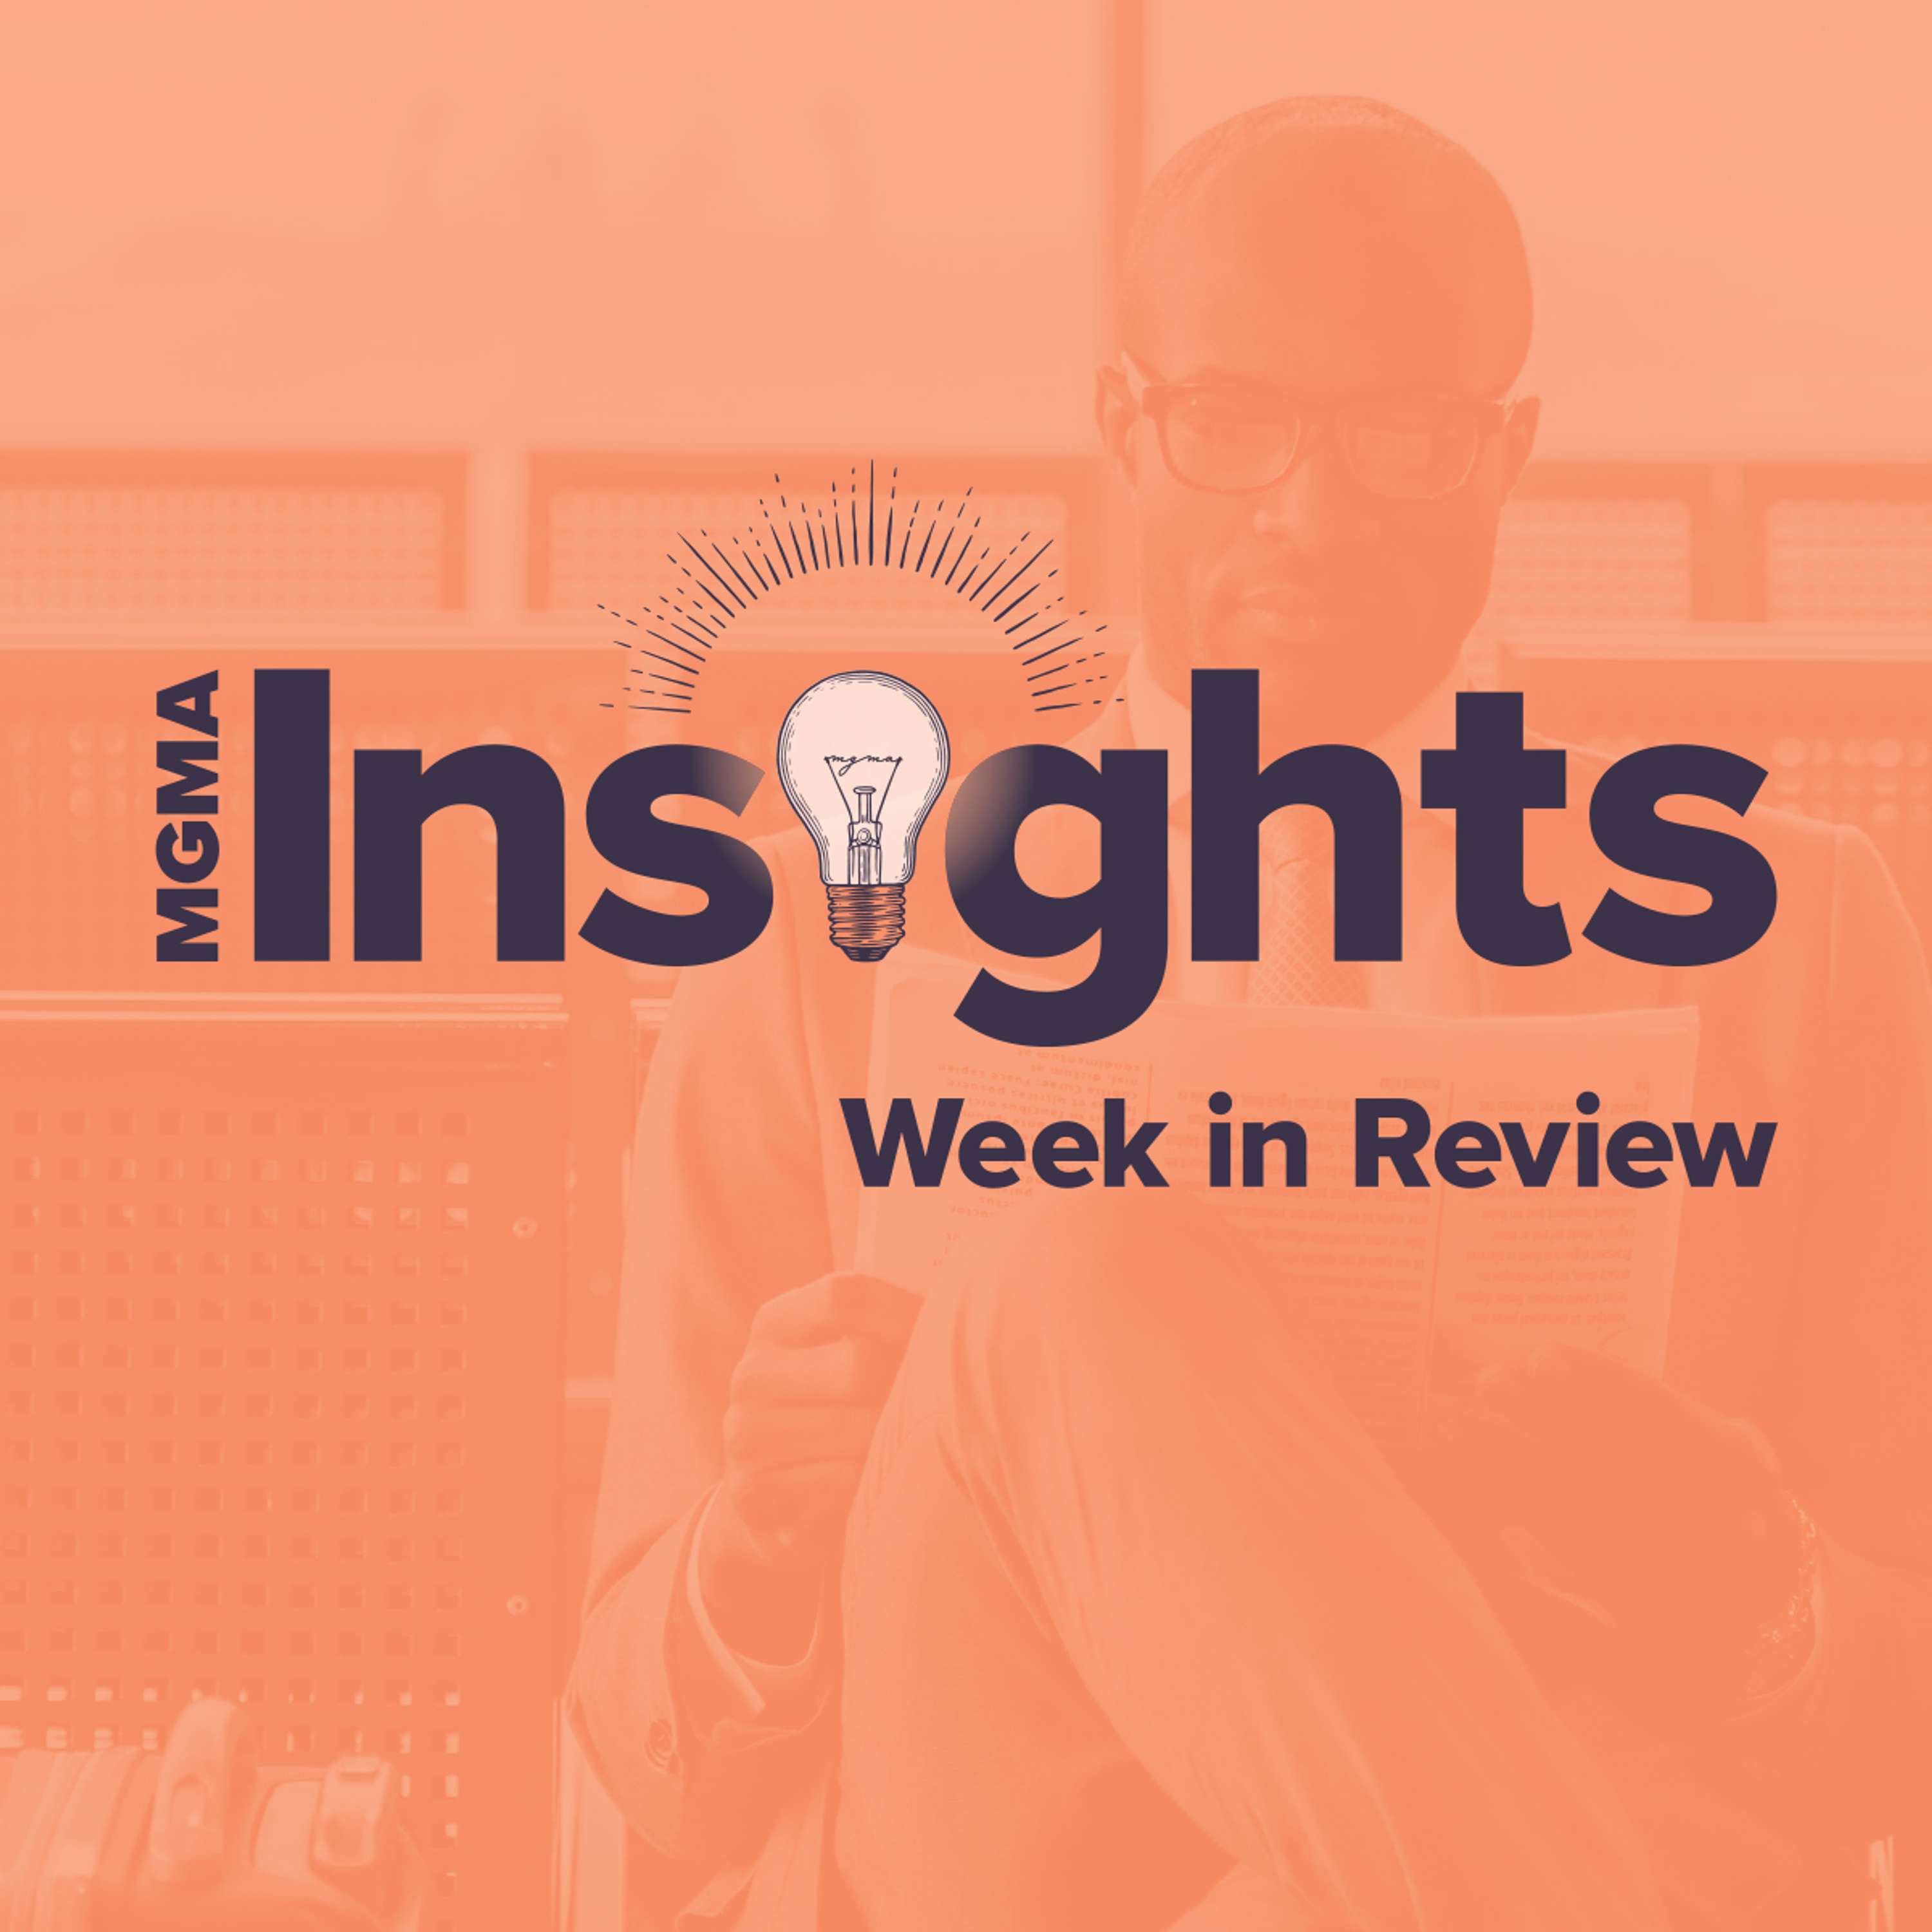 MGMA Week in Review:  Leveraging AI, Maintaining Event Momentum, and Tips on Contract Negotiations